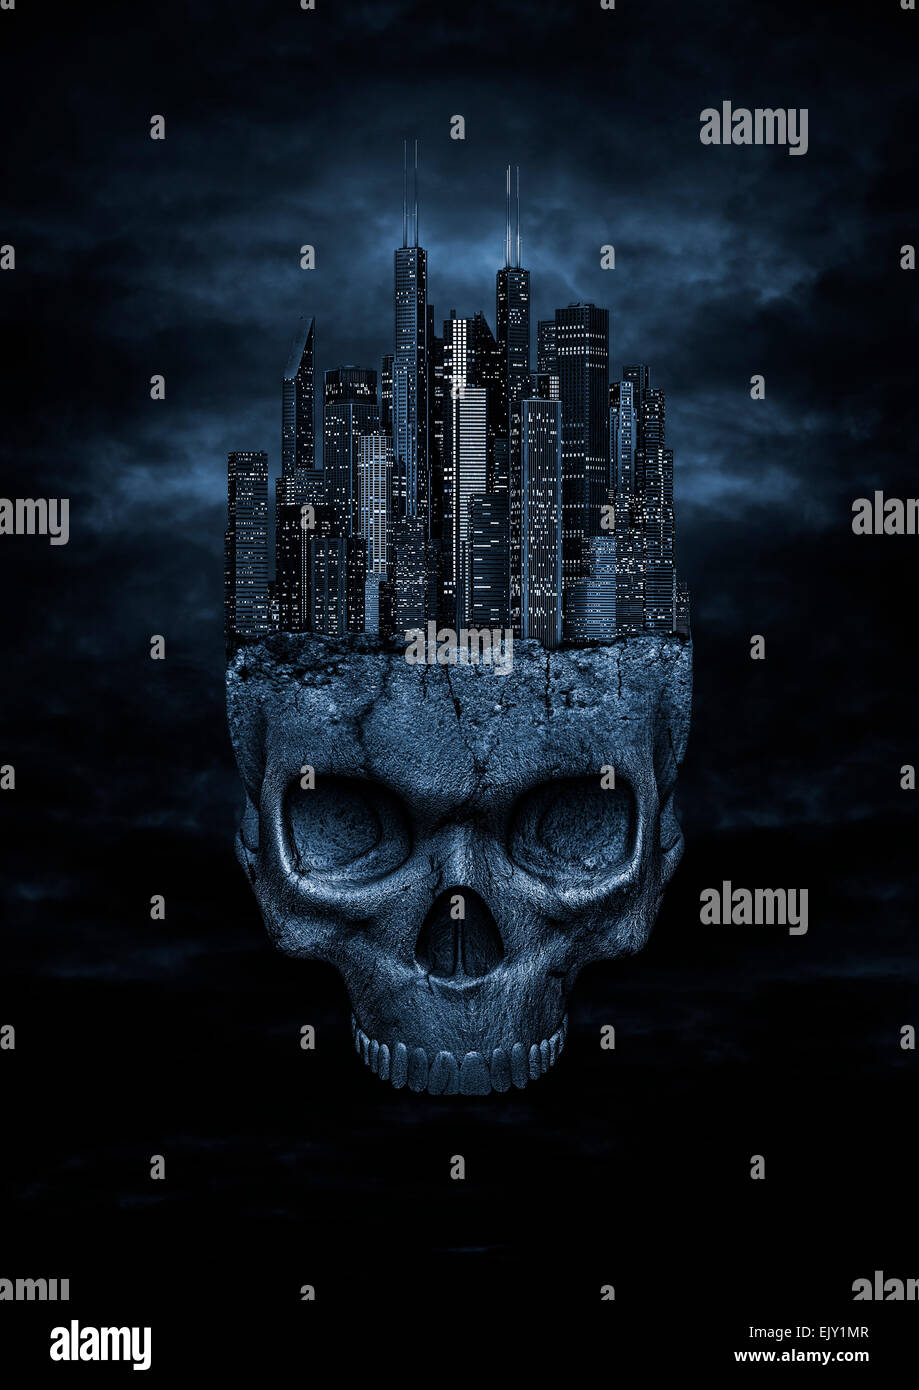 3D render of night time modern city perched on top of stone skull in night sky Stock Photo